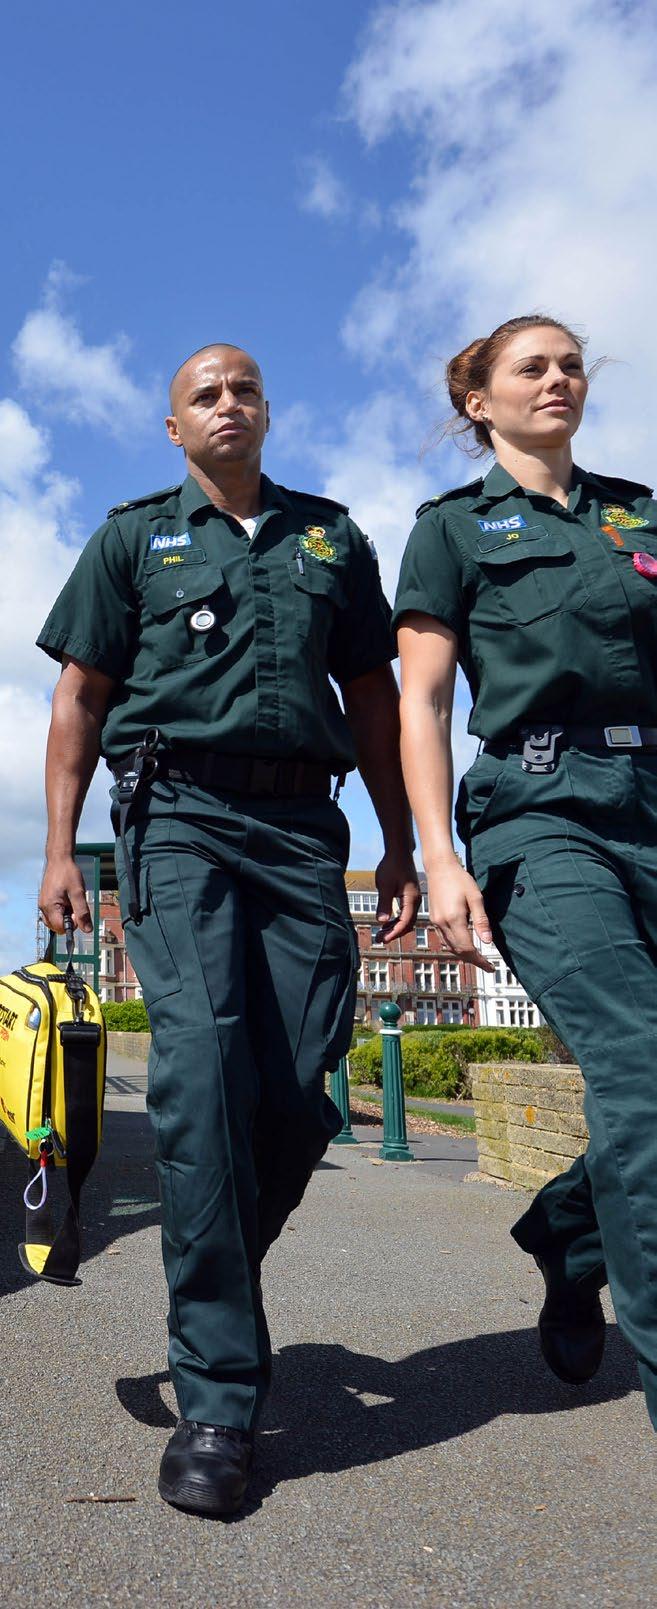 About us South East Coast Ambulance Service NHS Foundation Trust (SECAmb) was formed in 2006 from the merger of Kent, Surrey and Sussex ambulance services and in 2011 became a Foundation Trust.